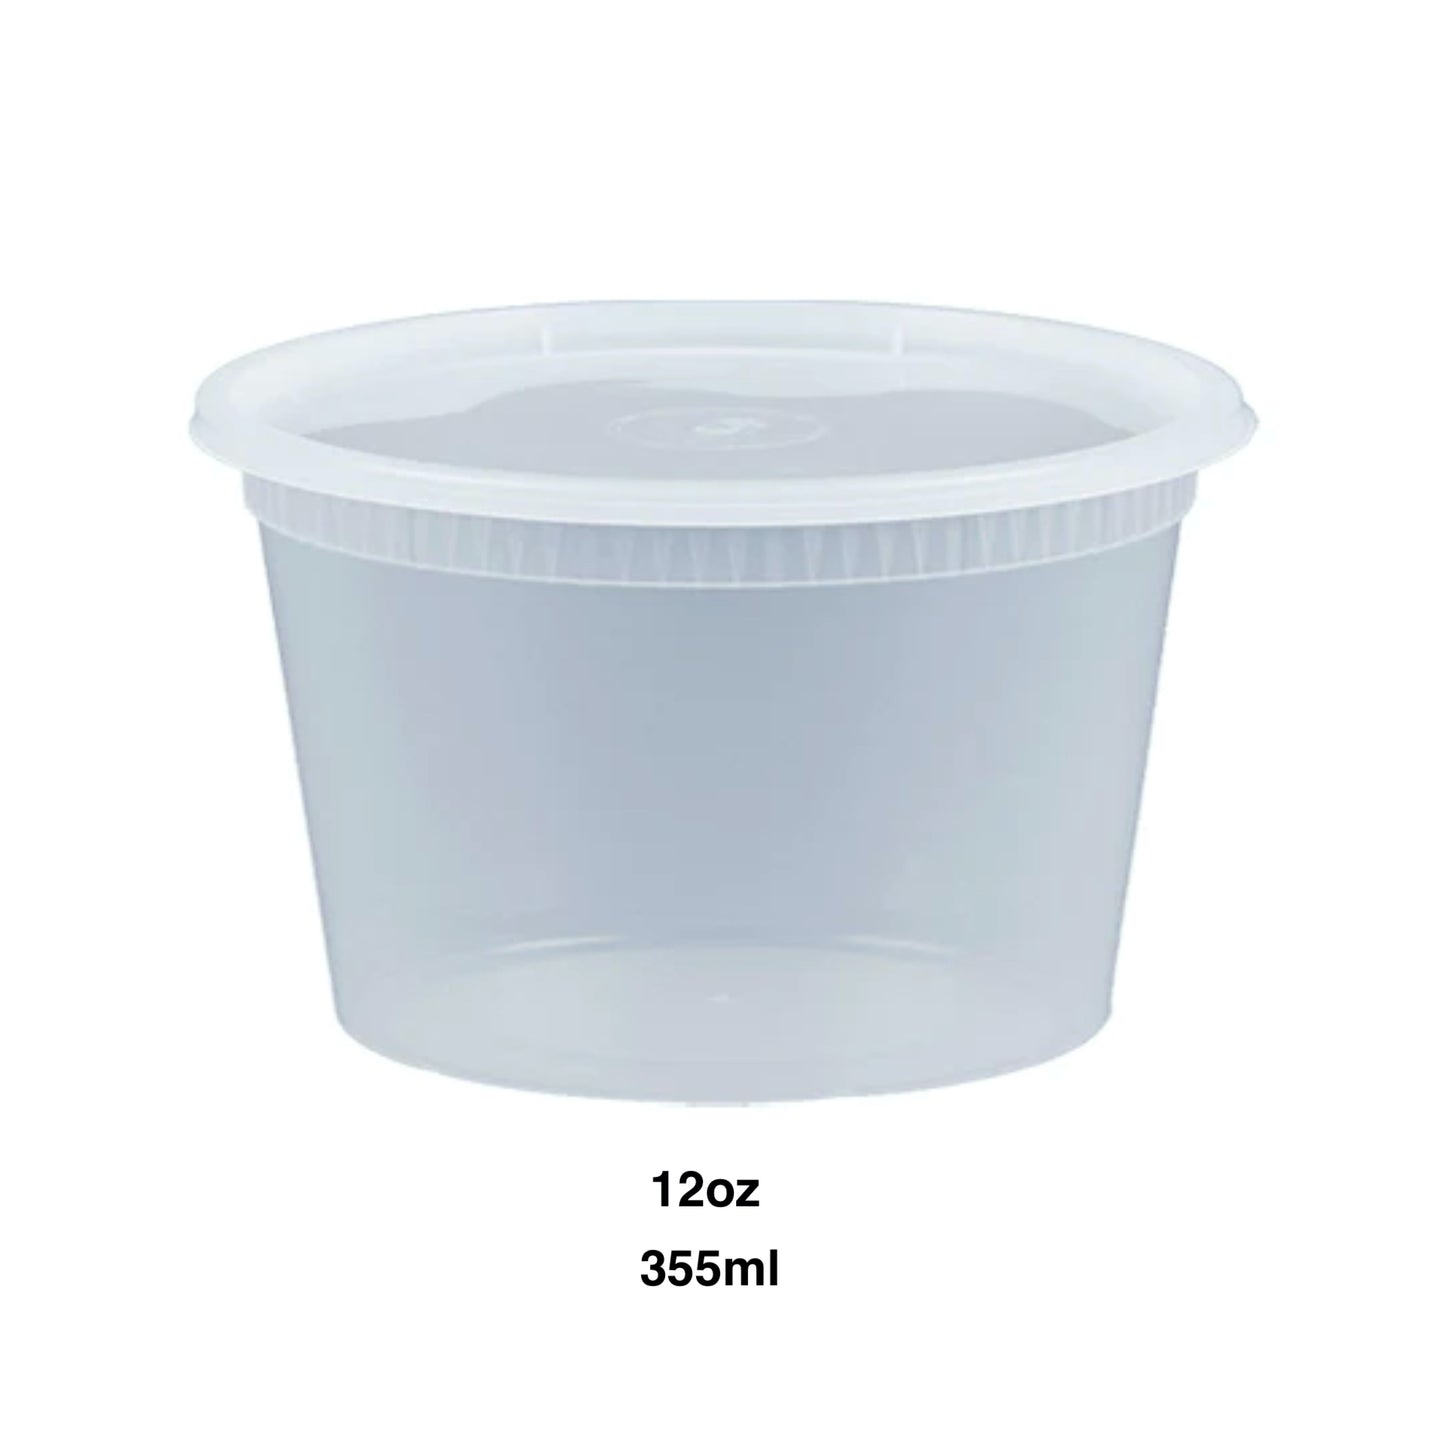 KIS-S12G | 240sets 12oz, 355ml Clear Plastic Deli Containers and Lids Combo; $0.139/set